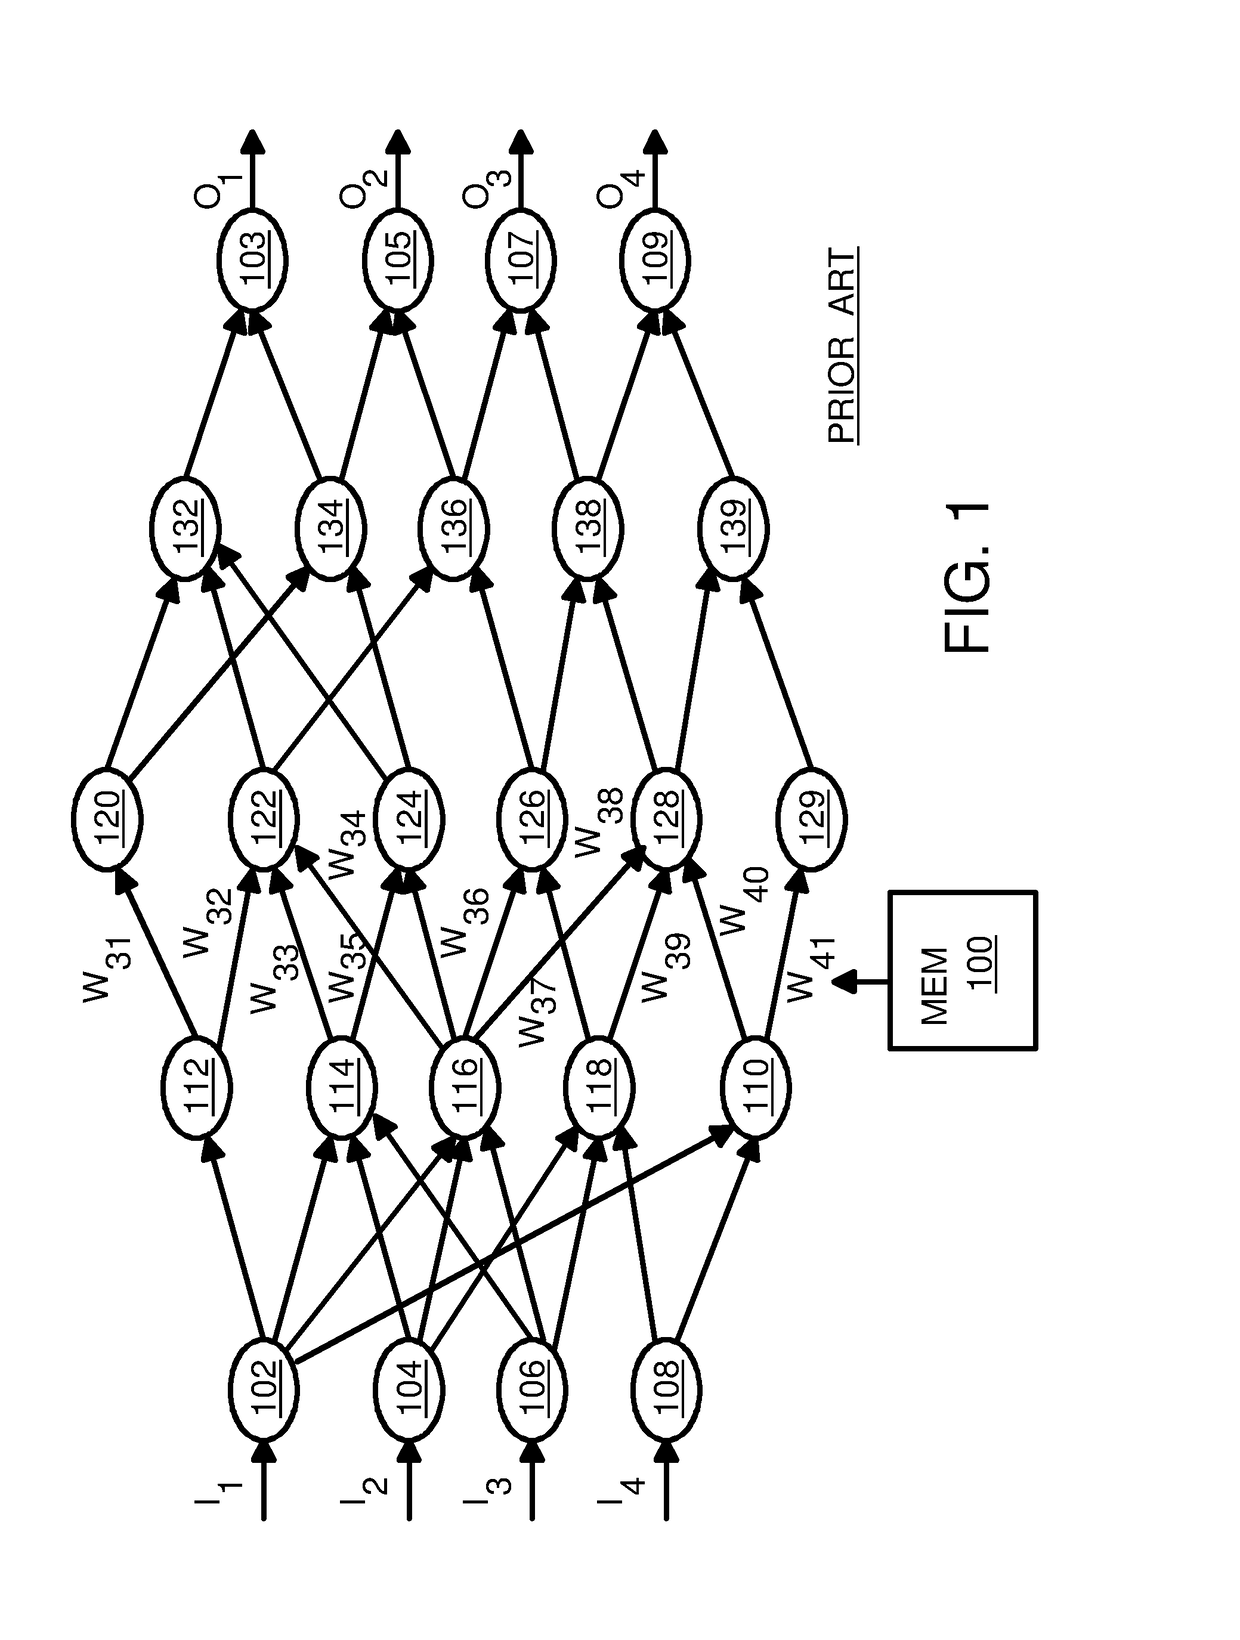 Method and System for Bit-Depth Reduction in Artificial Neural Networks